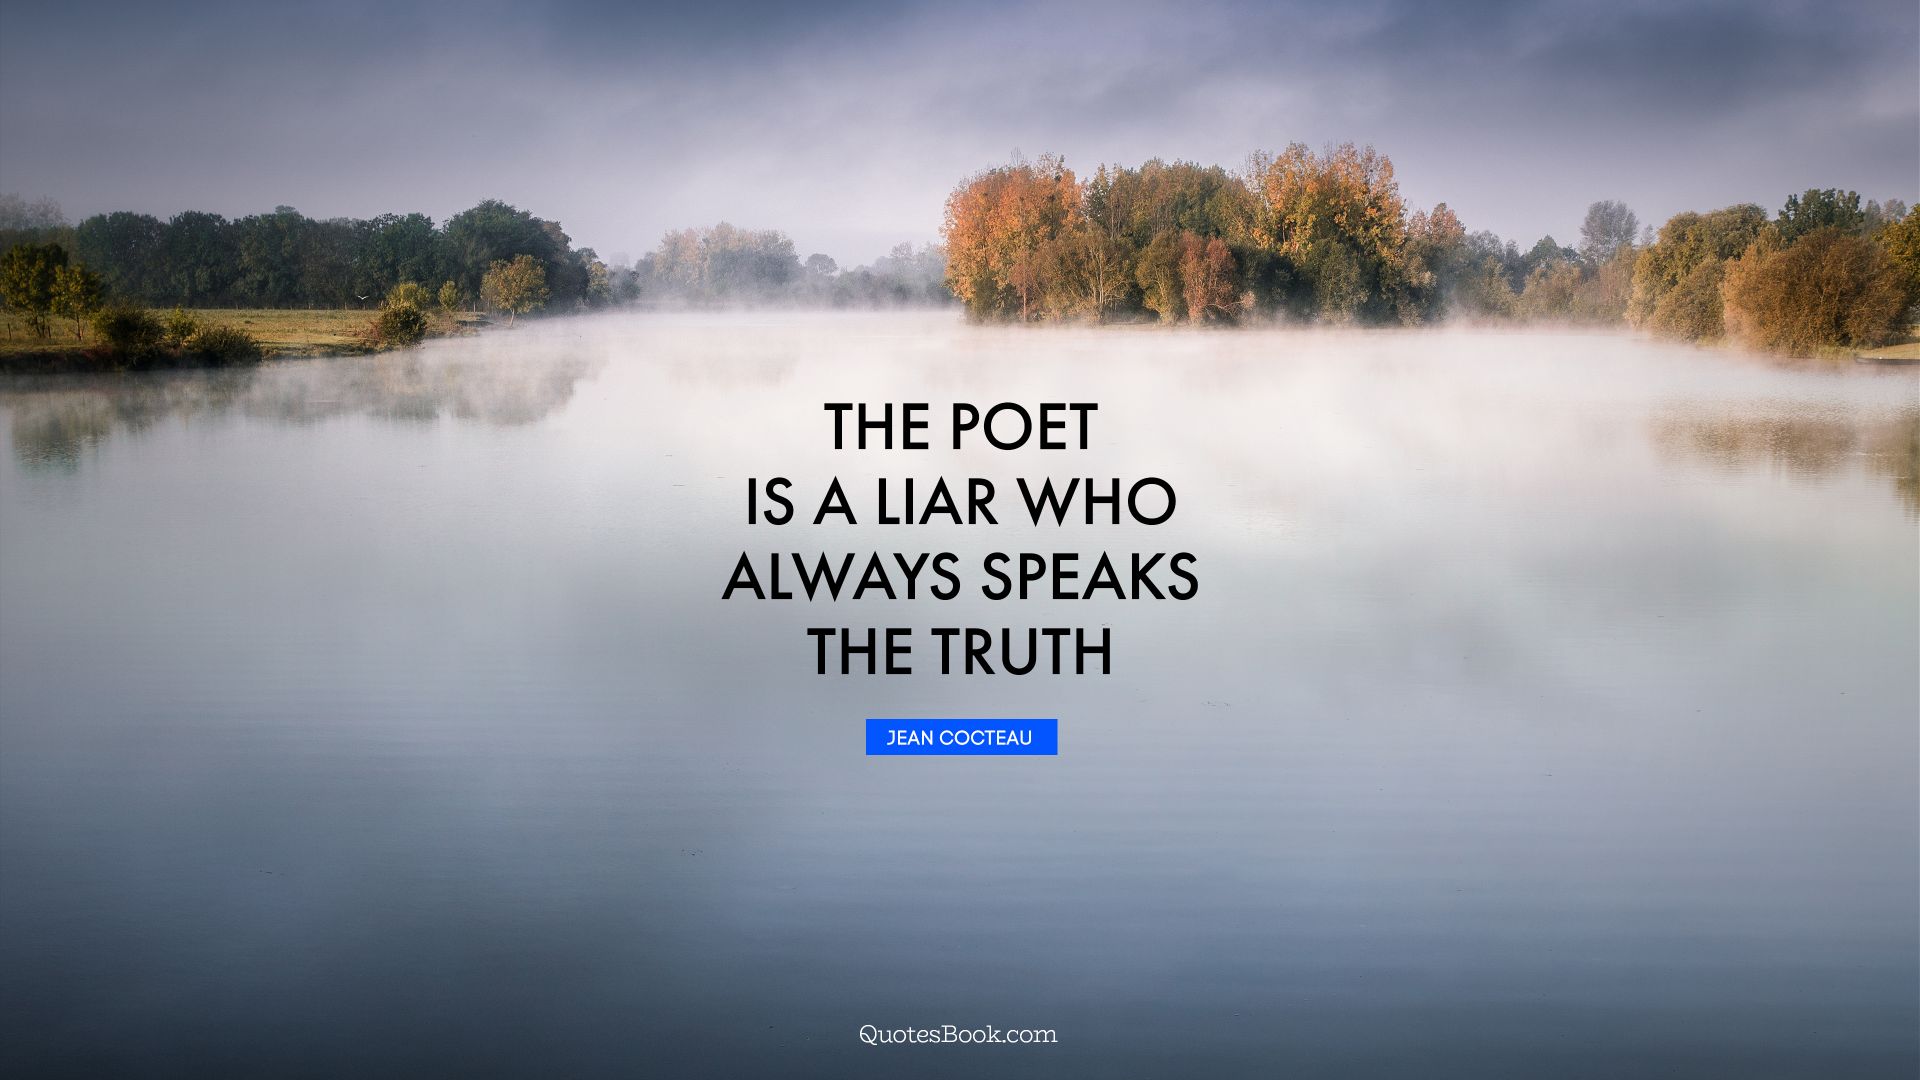 The poet is a liar who always speaks the truth. - Quote by Jean Cocteau